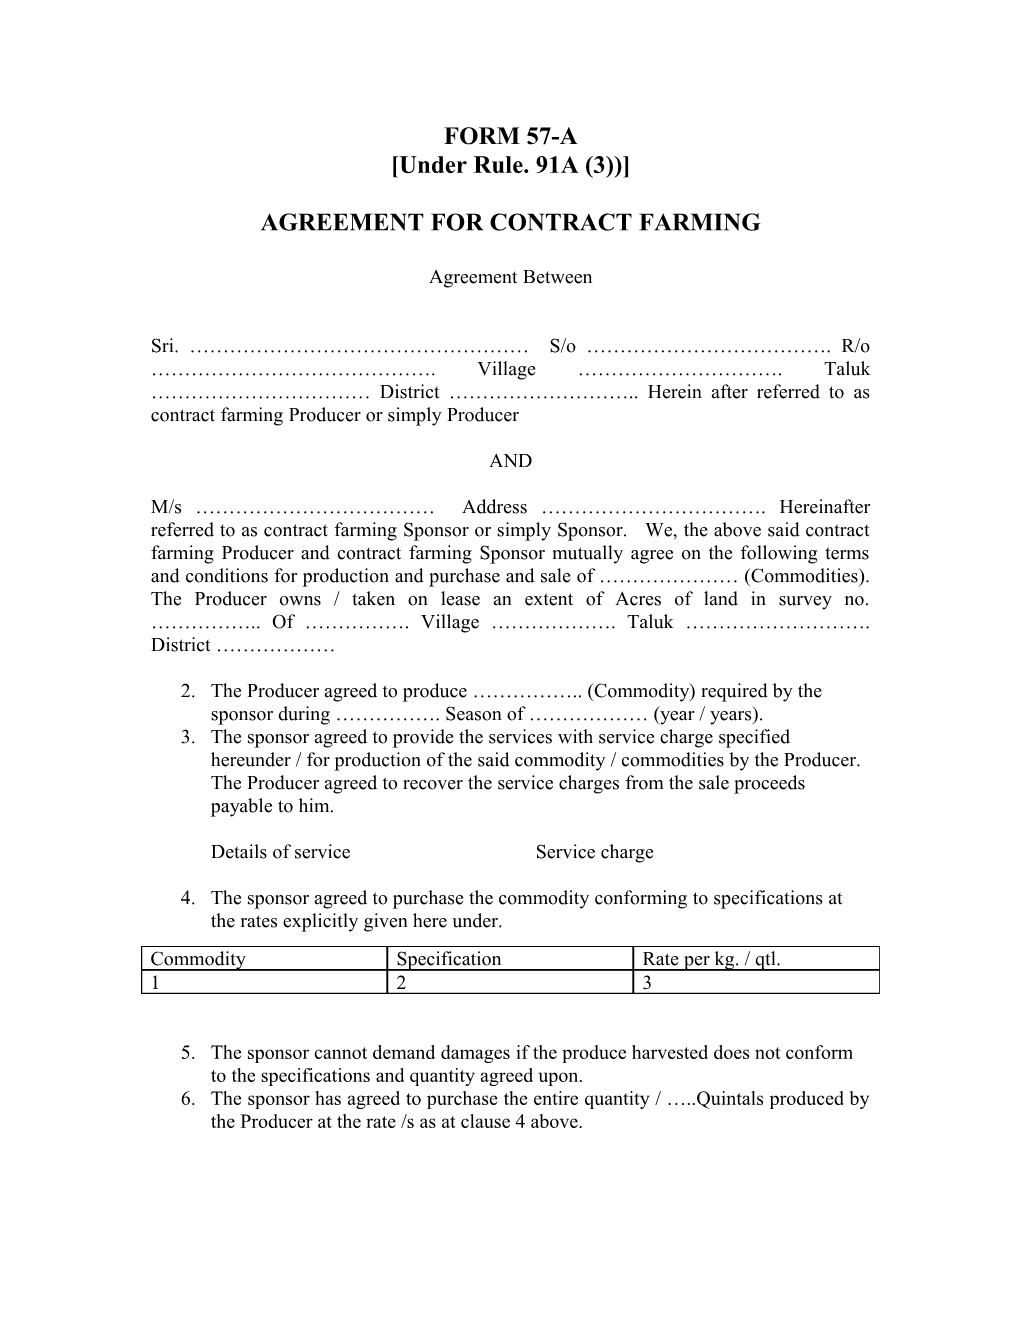 Agreement for Contract Farming